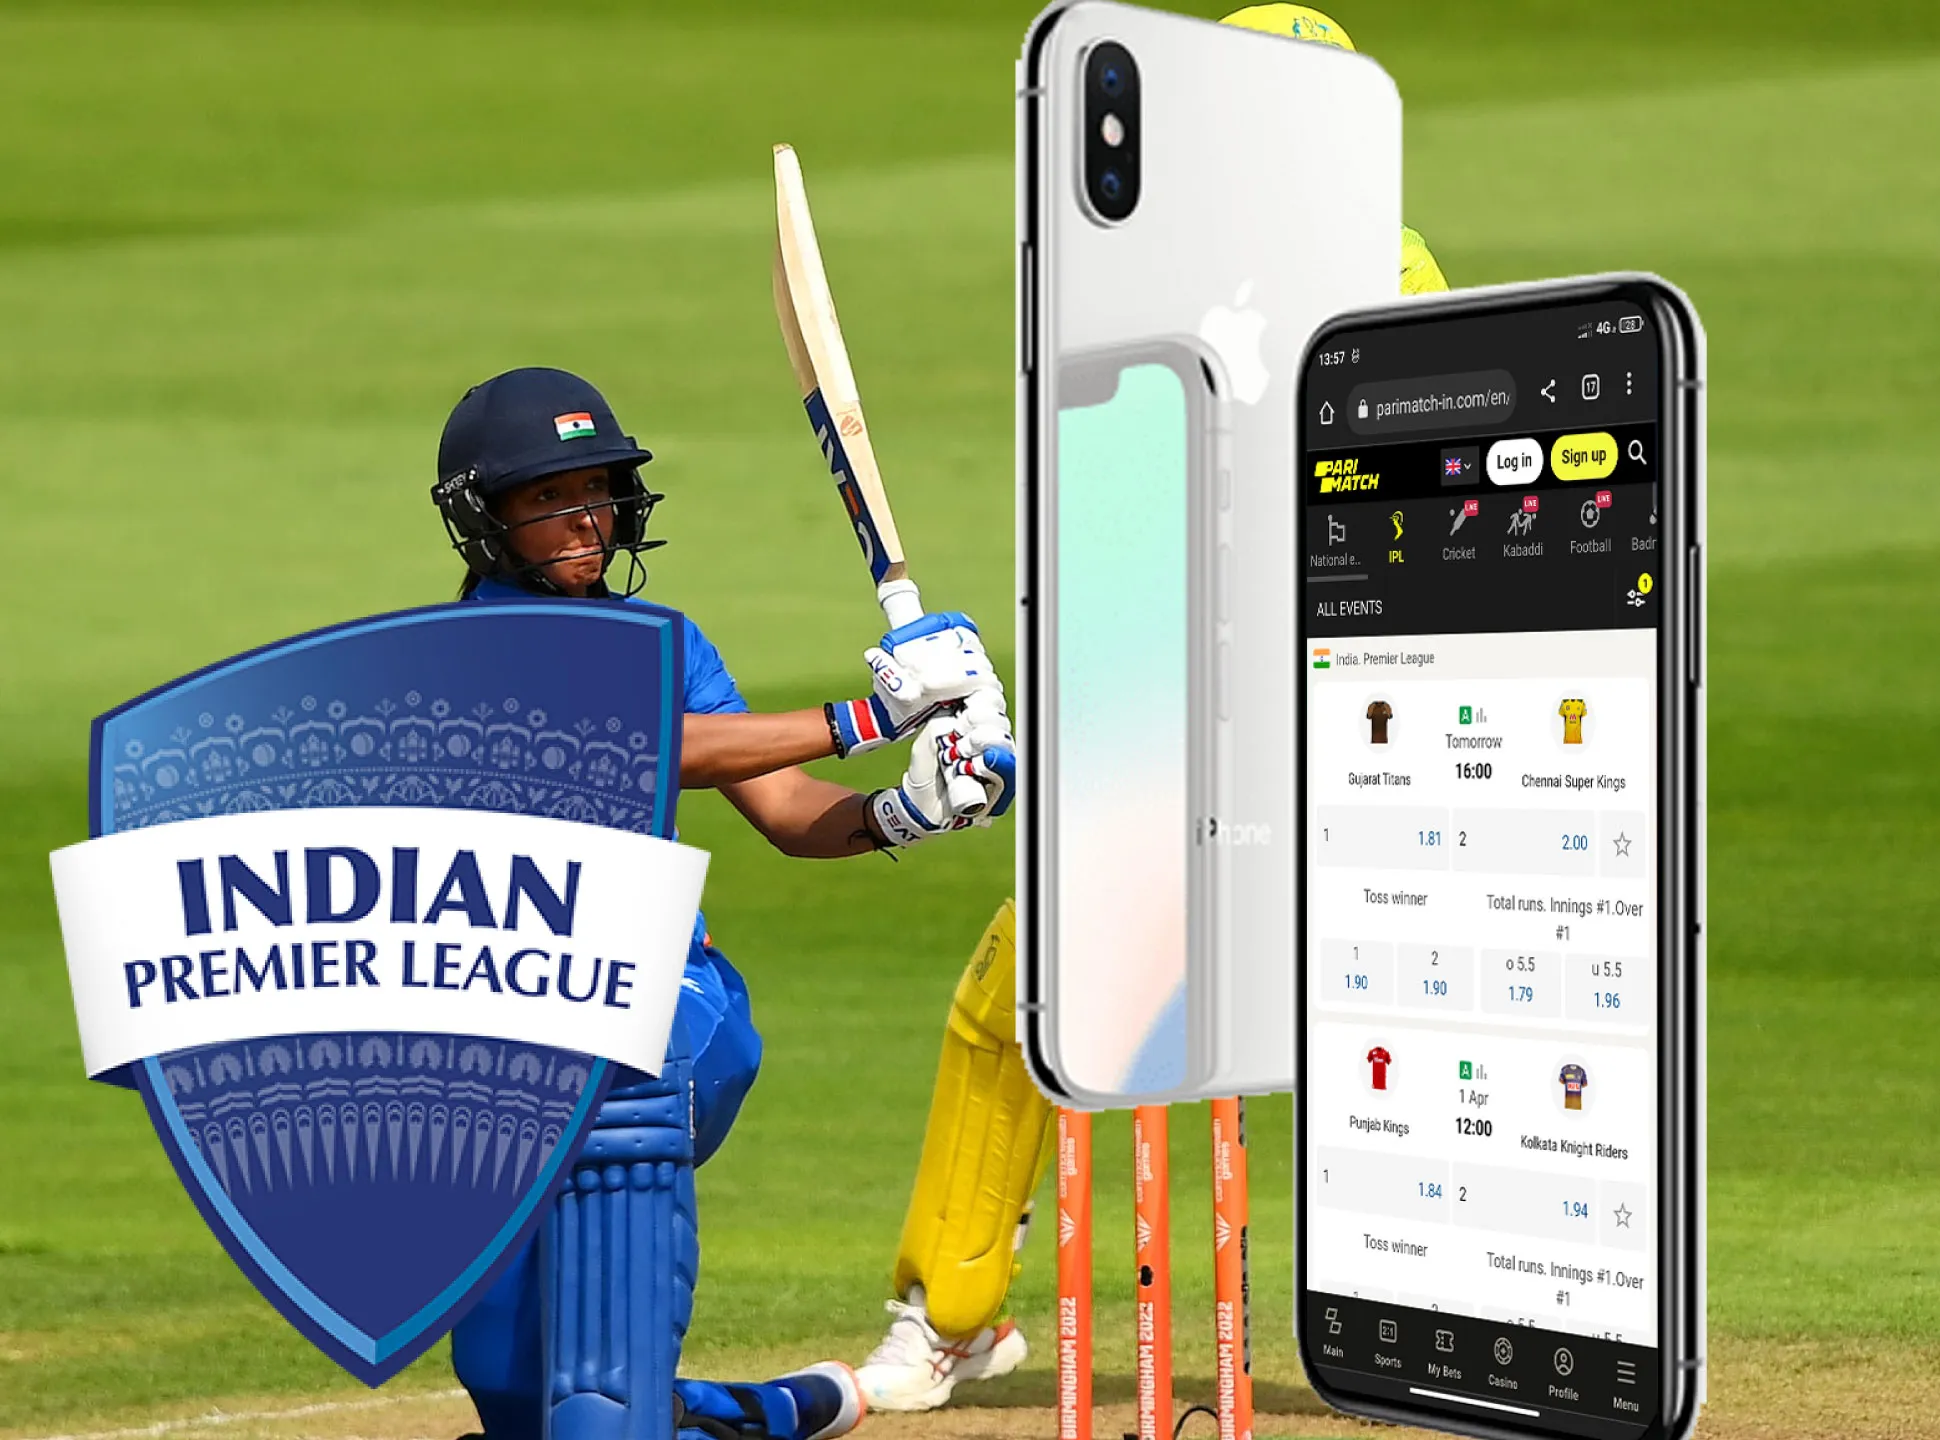 Download the Parimatch mobile app on your Android or iOS device and place bets on the various IPL events.